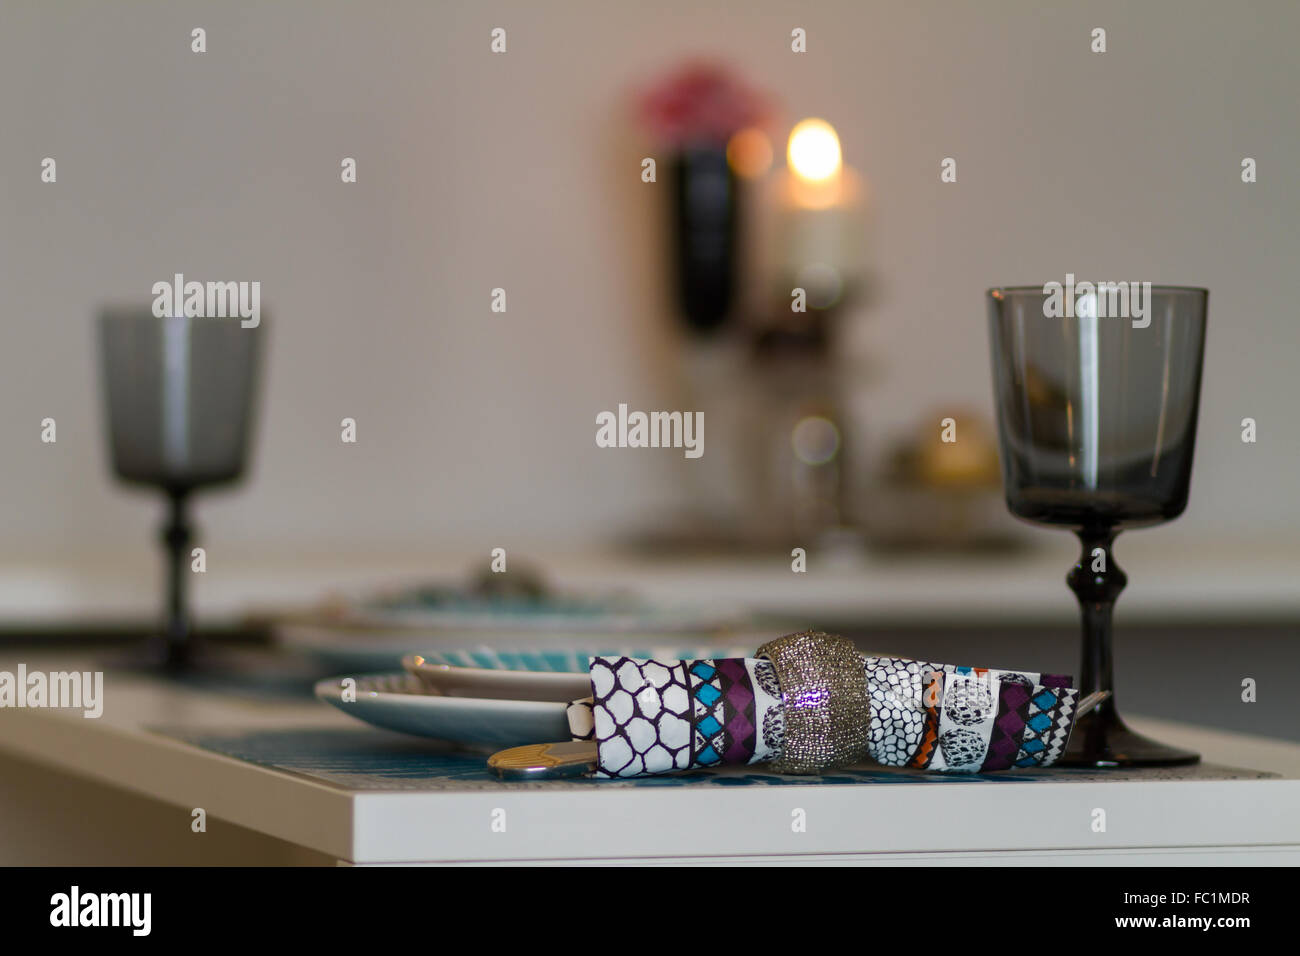 Romantic table set for two people with plates, glasses and cutlery with flower and candle in the background Stock Photo